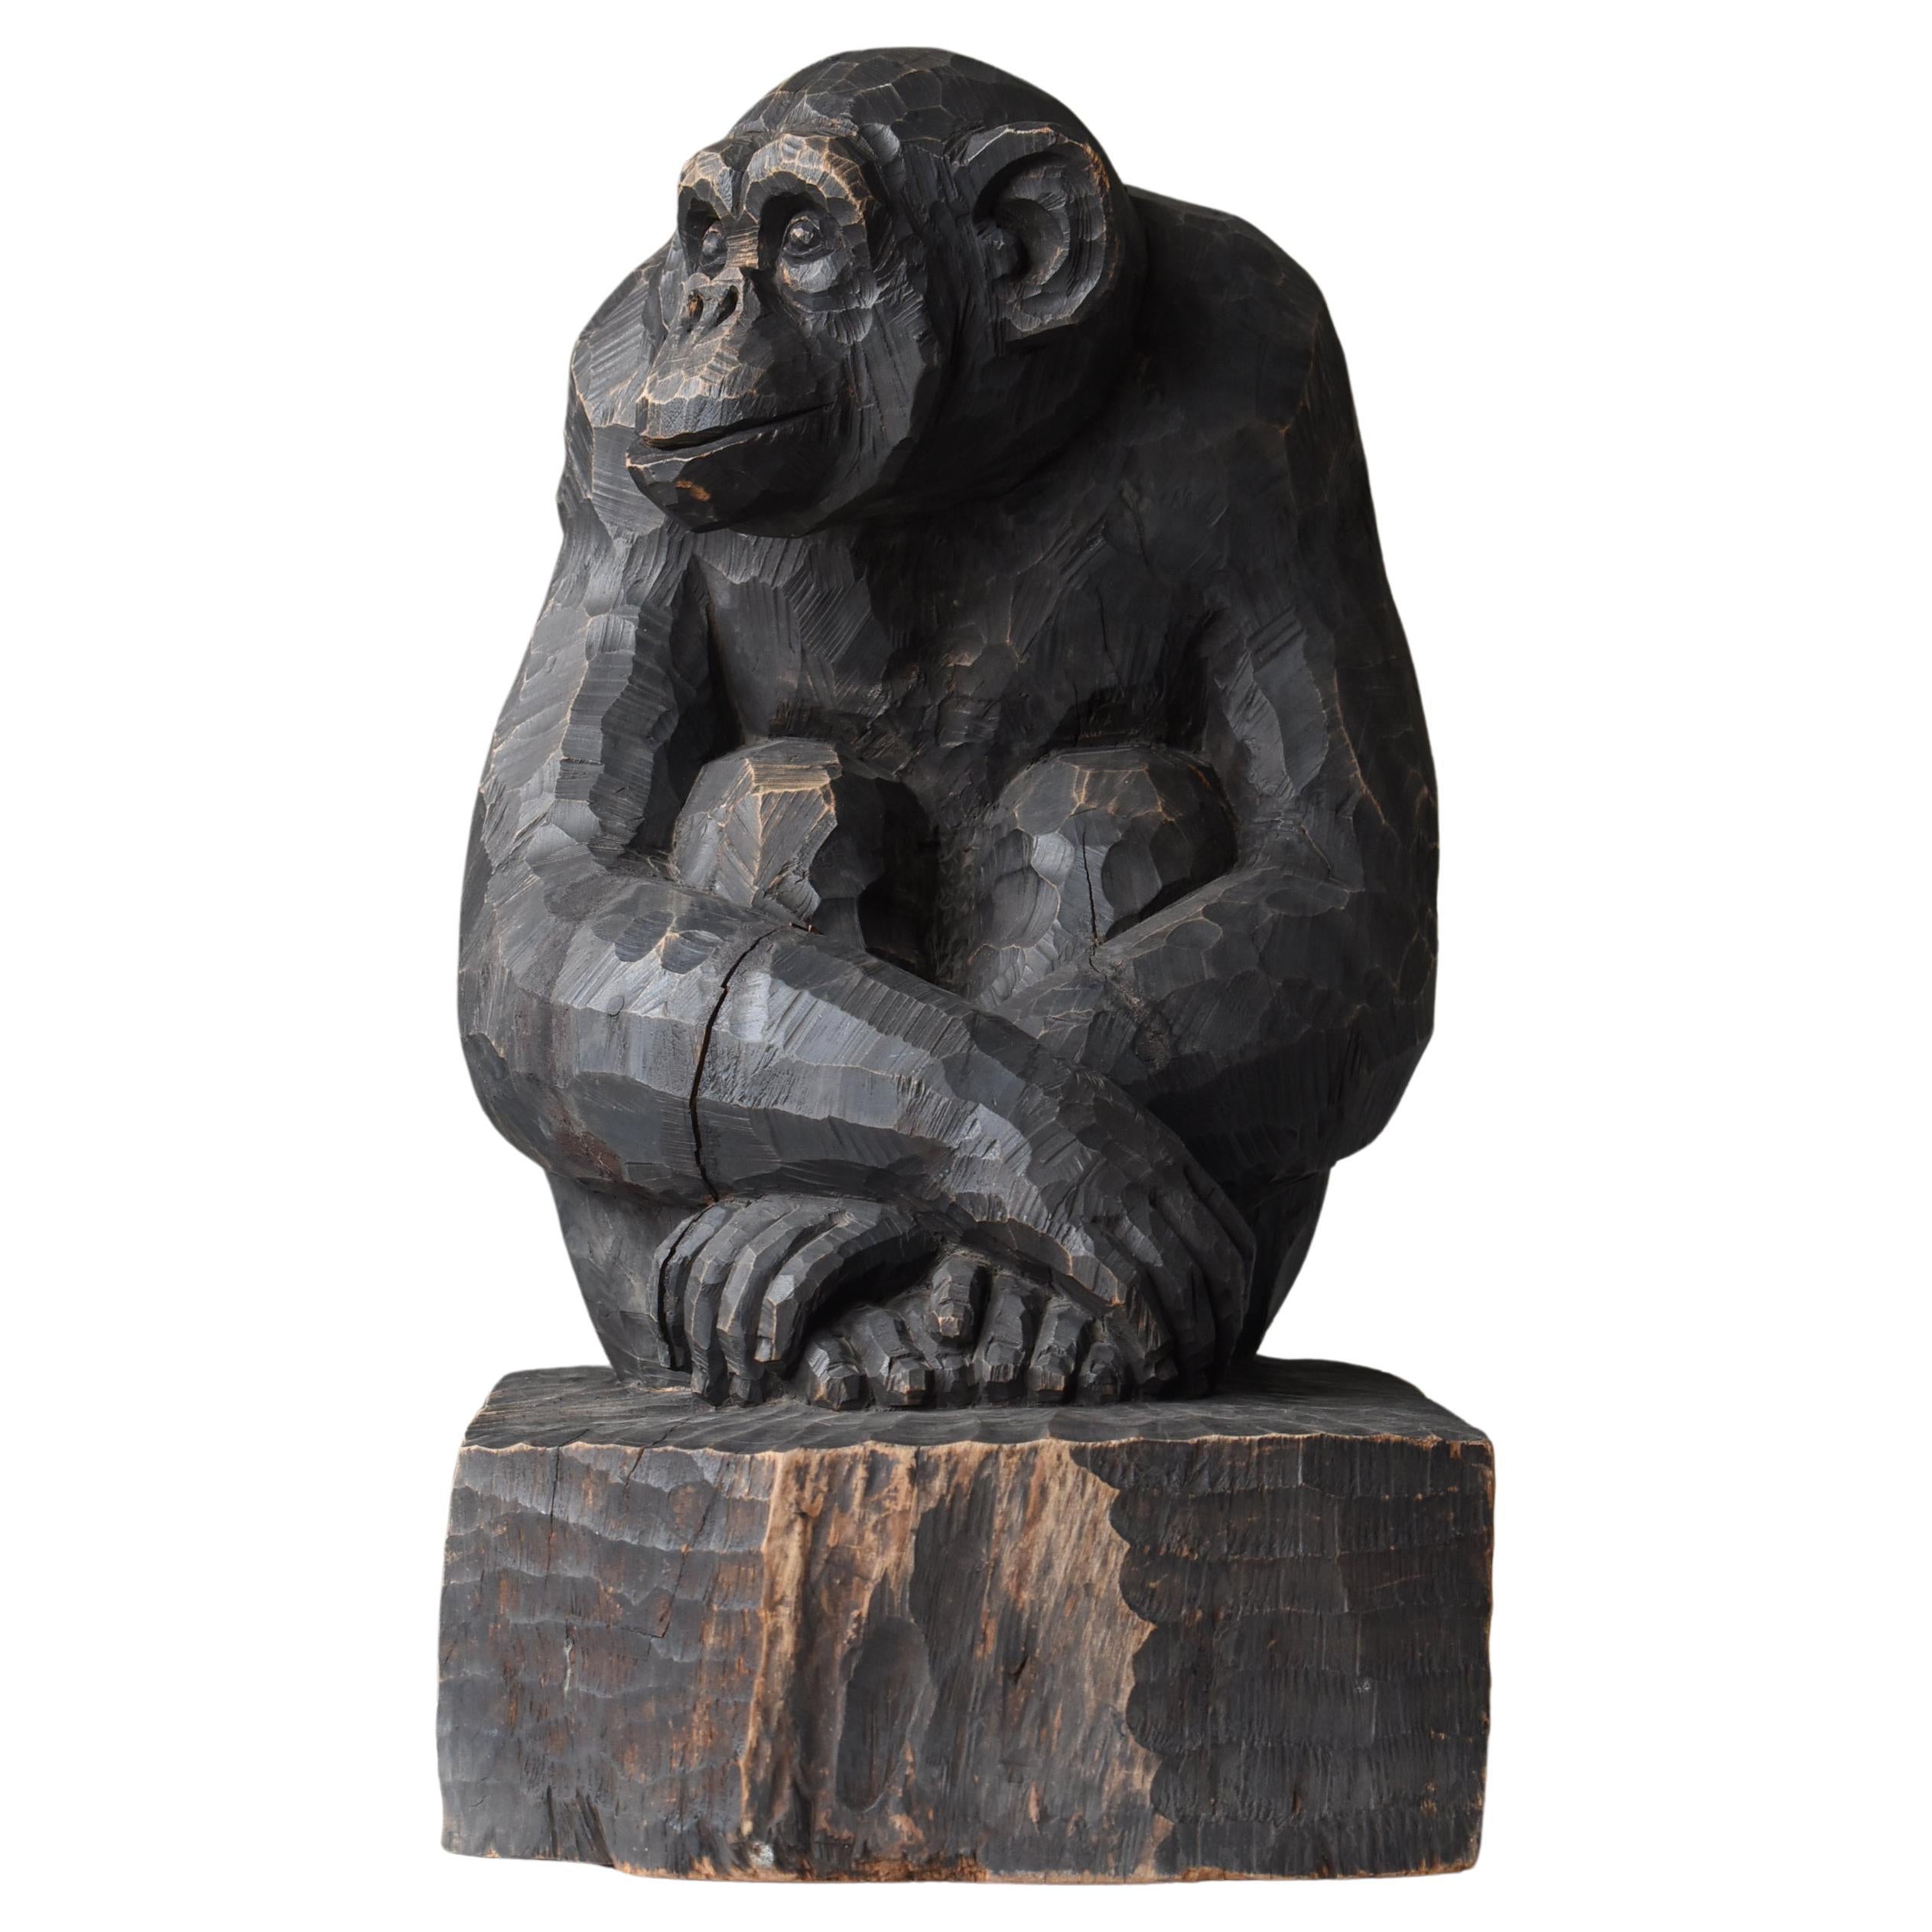 Japanese Old Wood Sculpture Chimpanzee 1940s-1960s / Wood Carving Mingei  For Sale